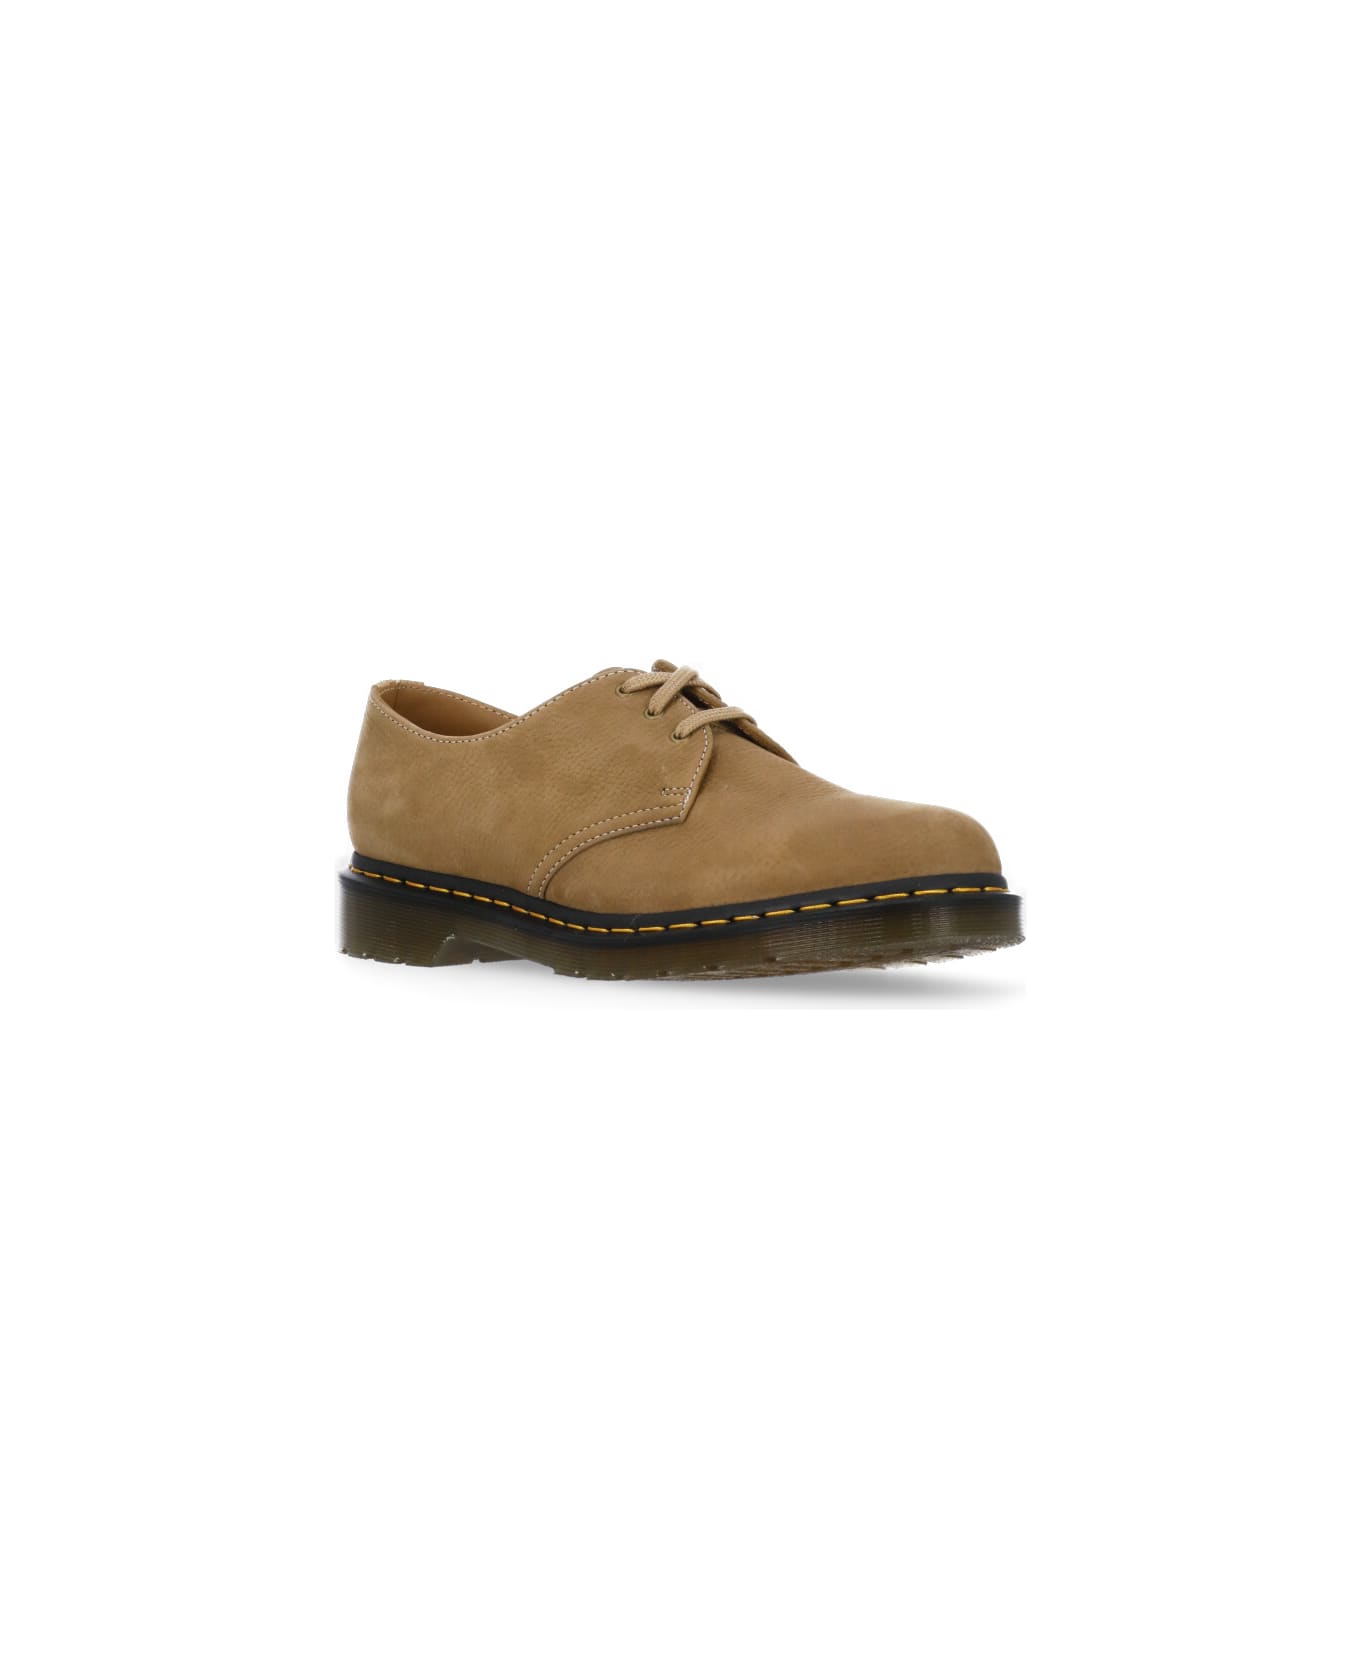 Dr. Martens 1461 Lace-up Oxford Shoes - Beige ローファー＆デッキシューズ